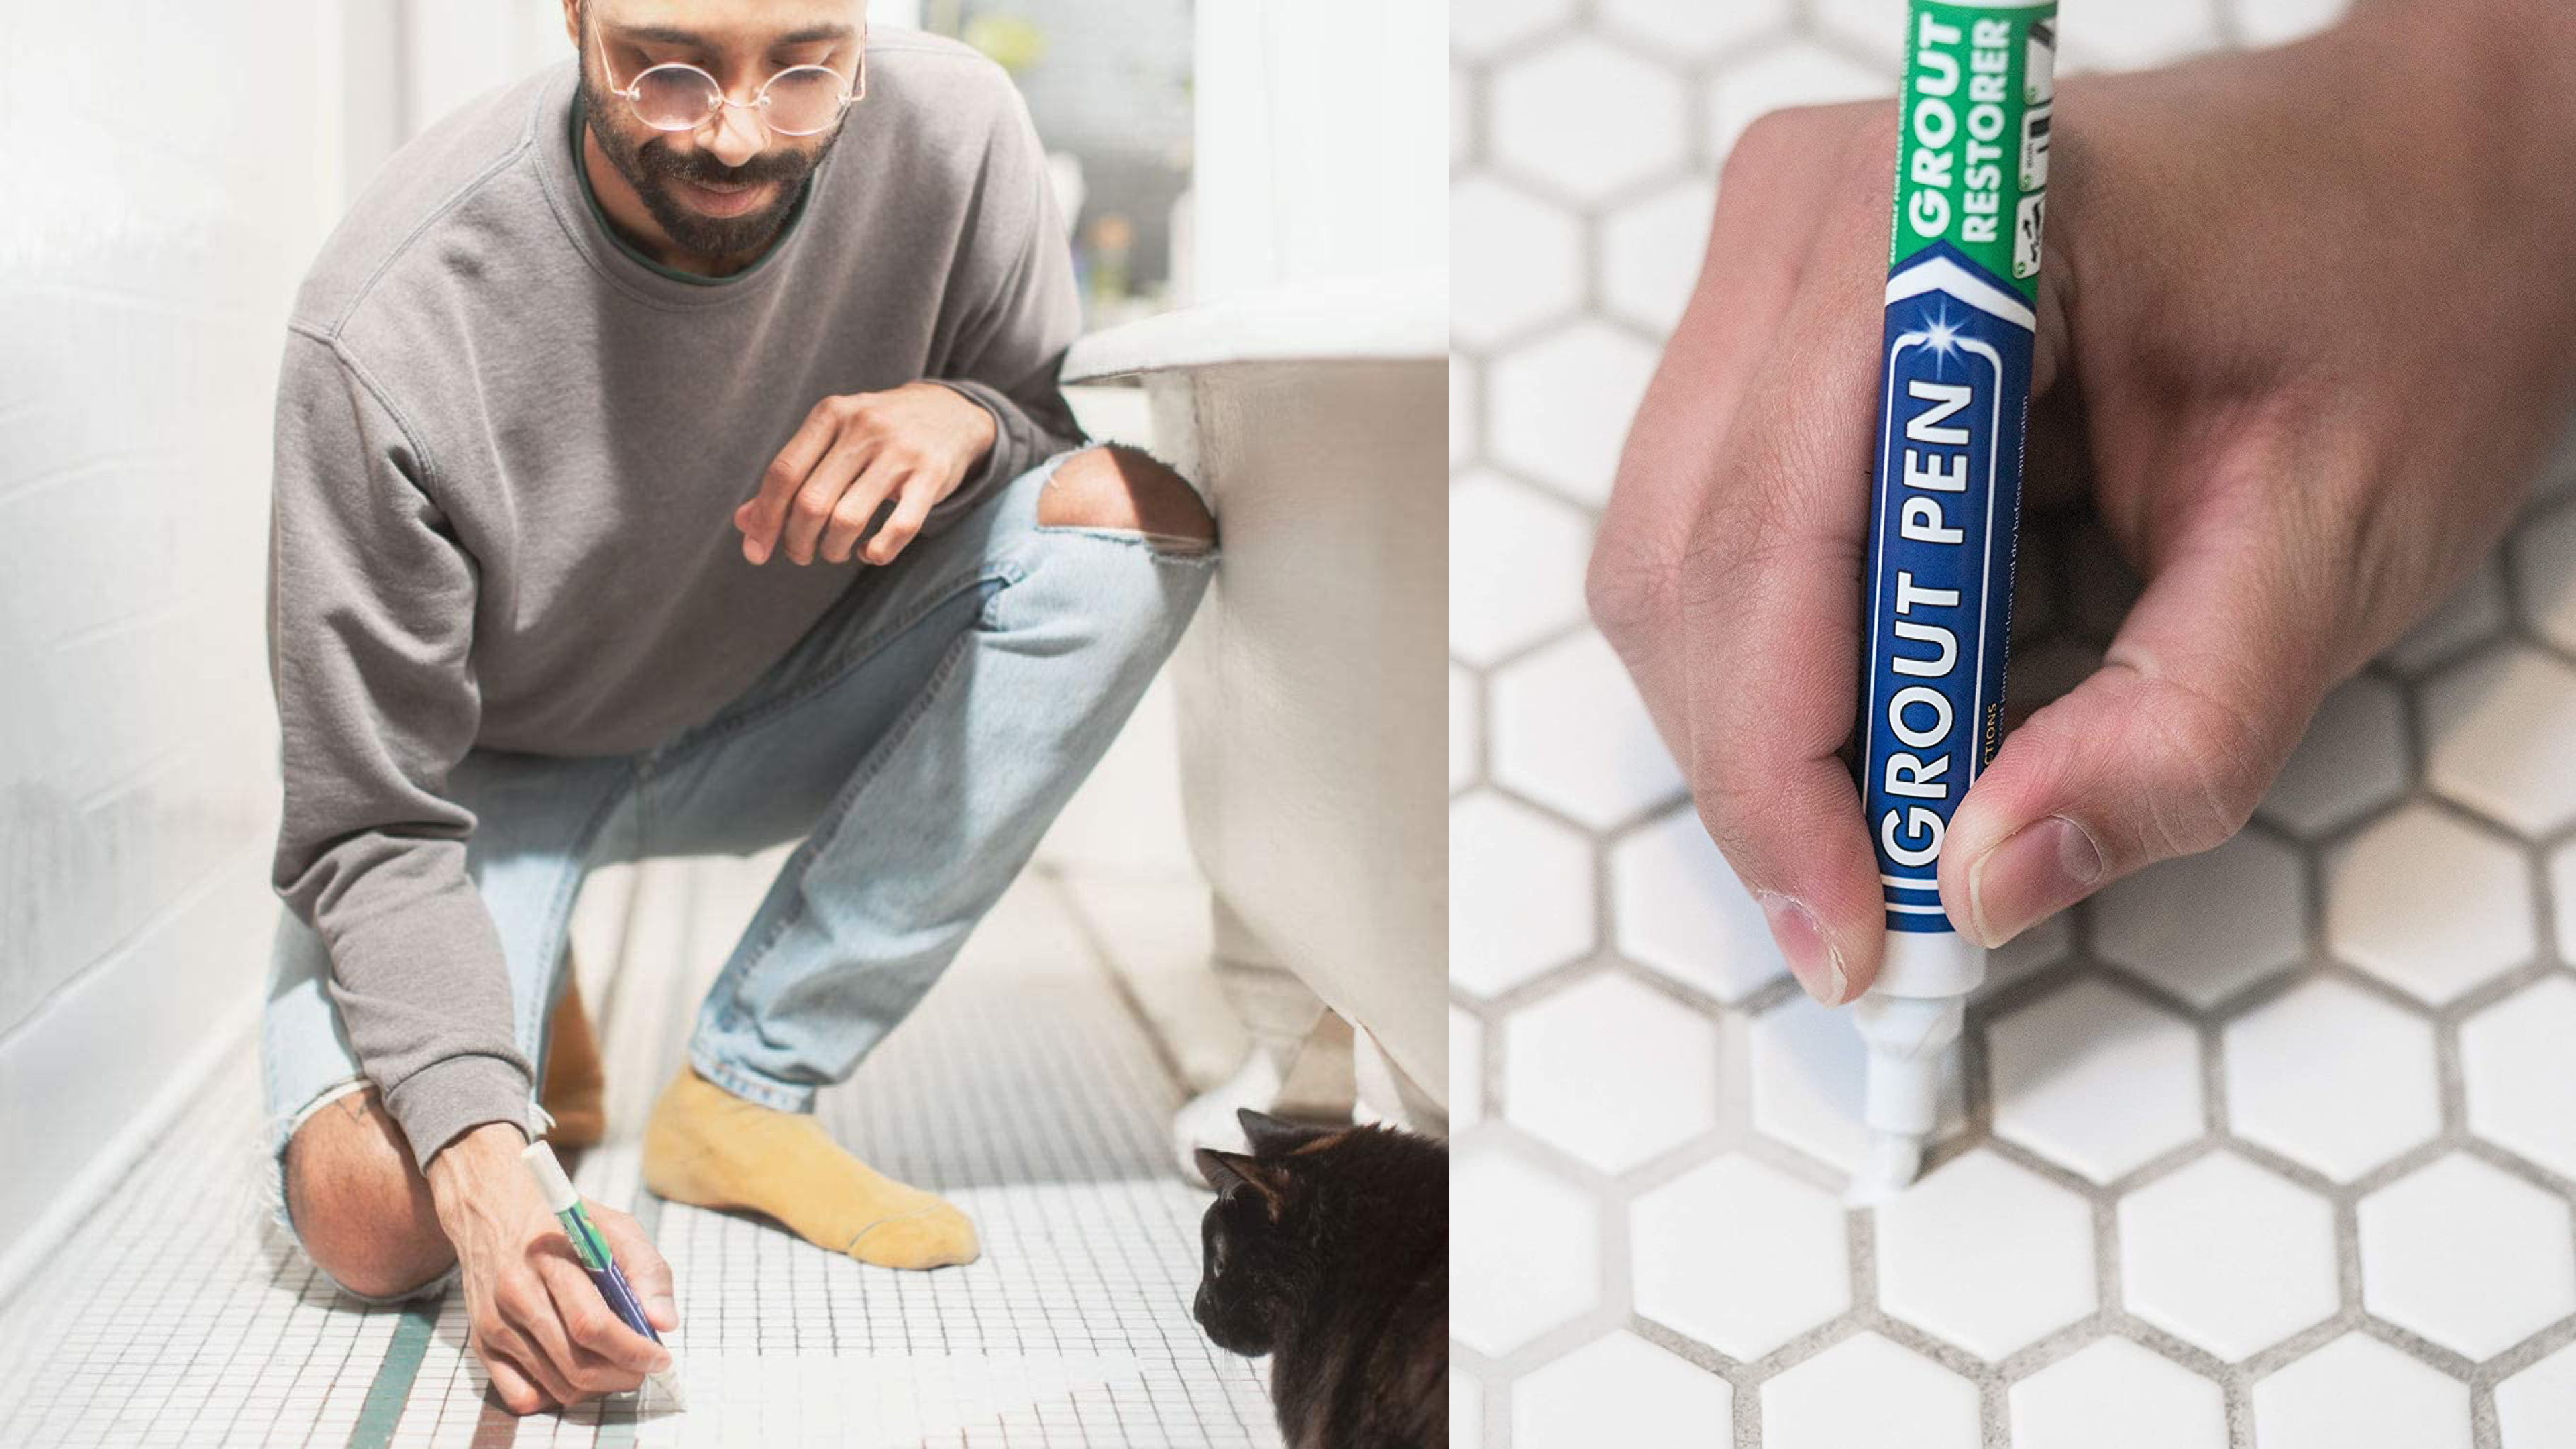 grout marker to clean bathroom floor grout